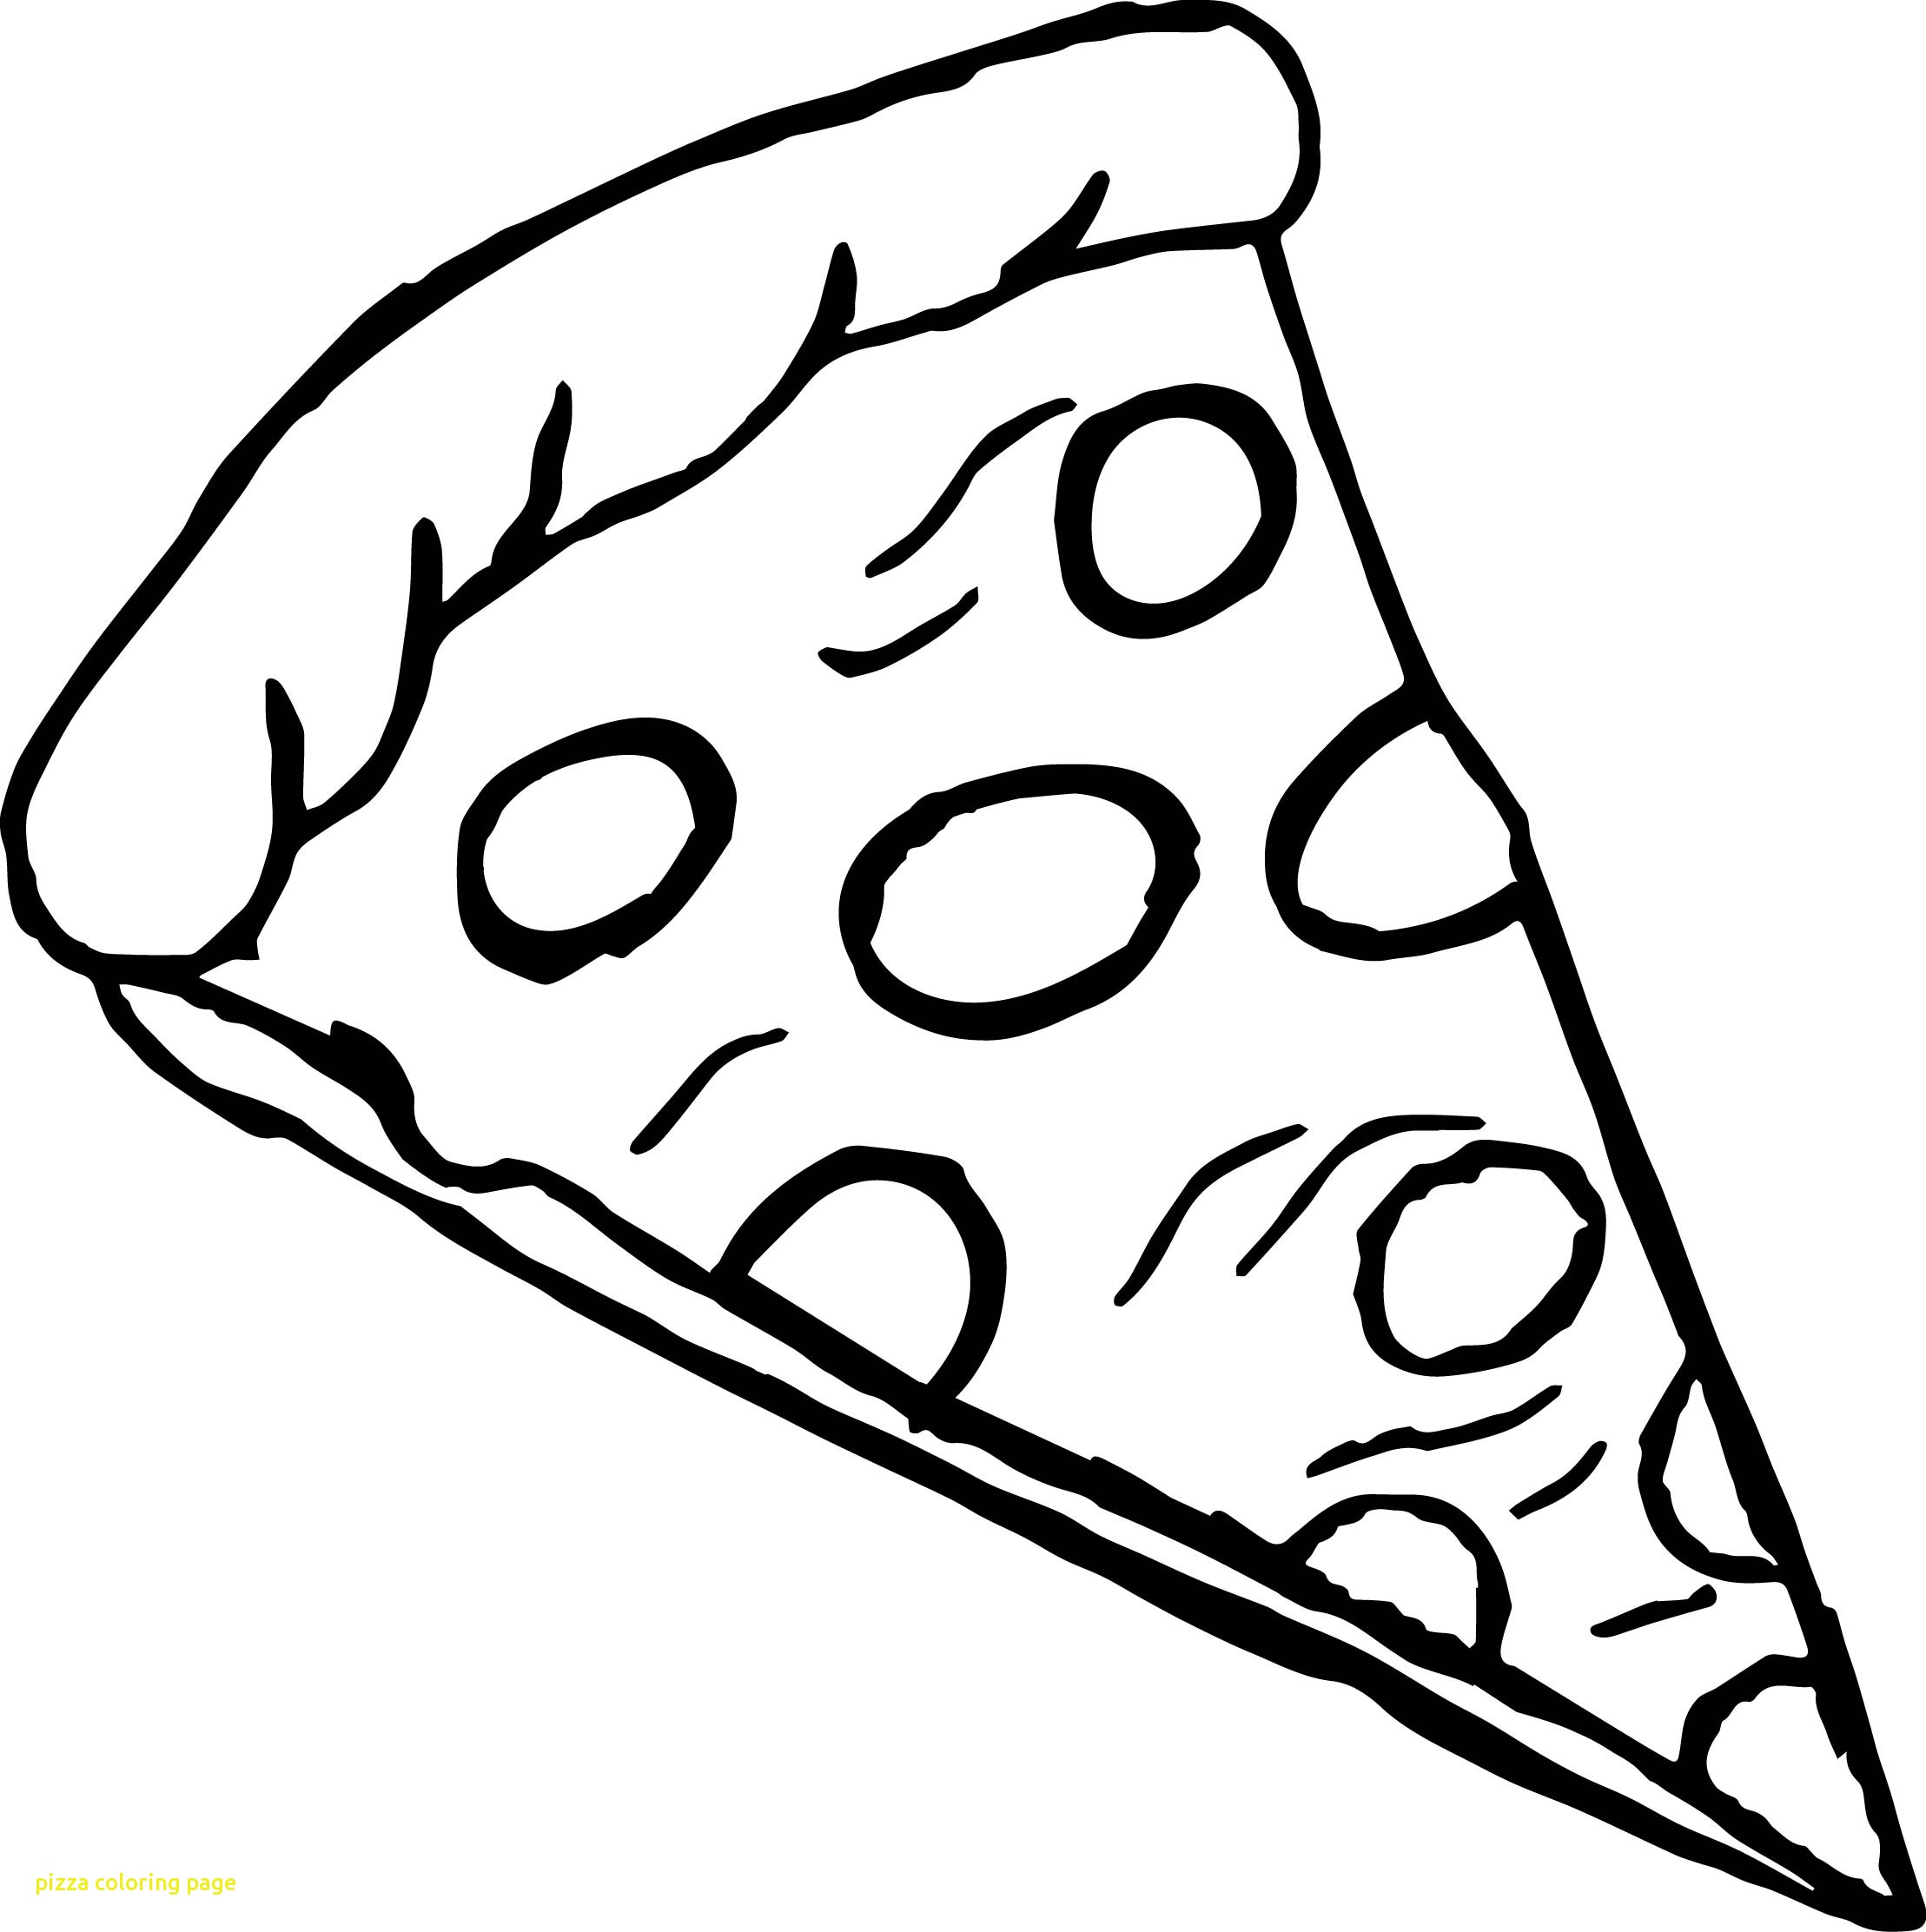 Free Printable Pizza Coloring Pages at GetDrawings Free download